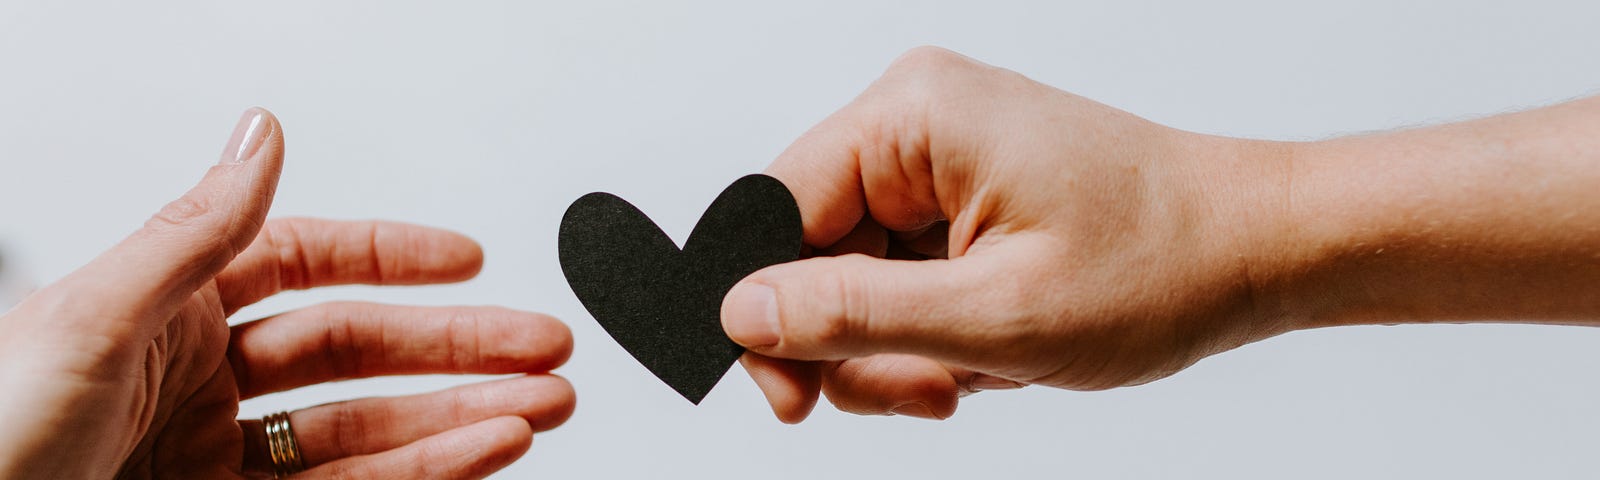 One person handing another a black heart paper cut-out.